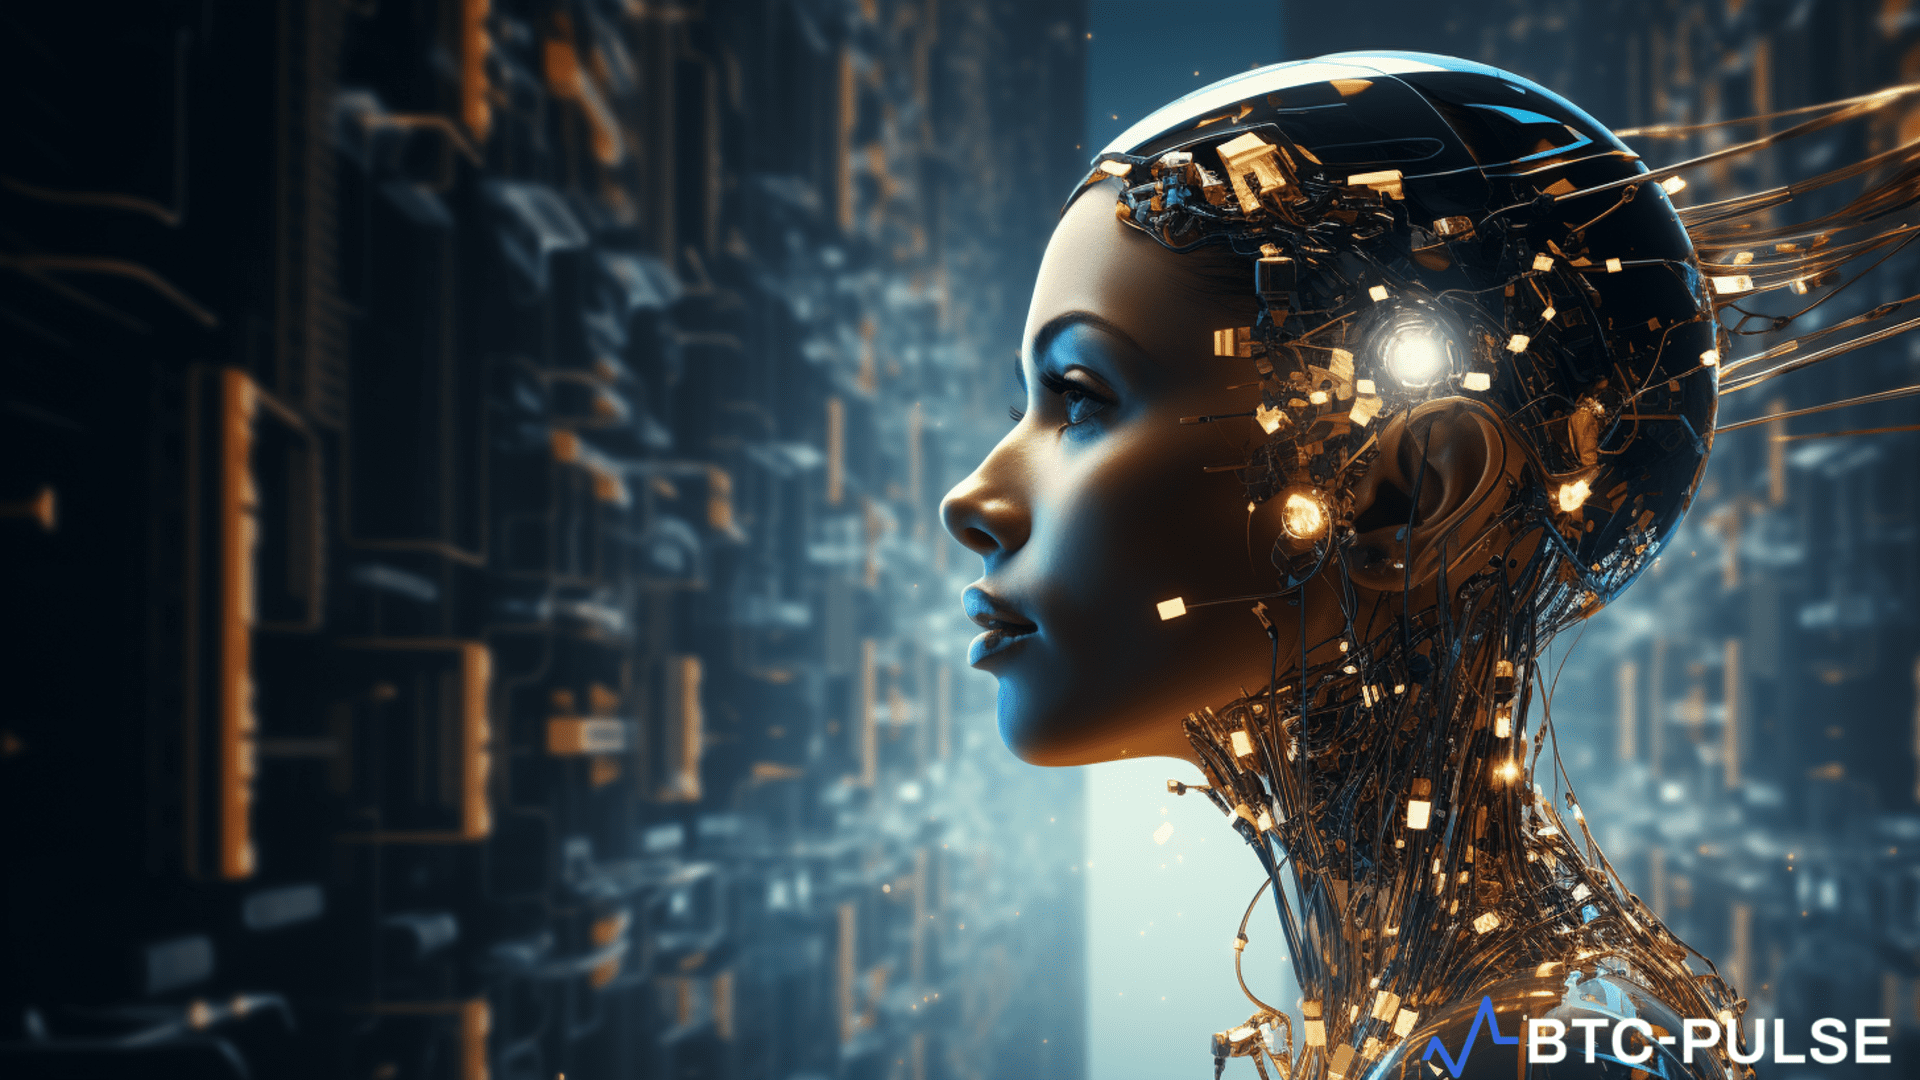 Exploring New Frontiers: Binance’s CZ Discusses AI Investments with OpenAI’s Sam Altman